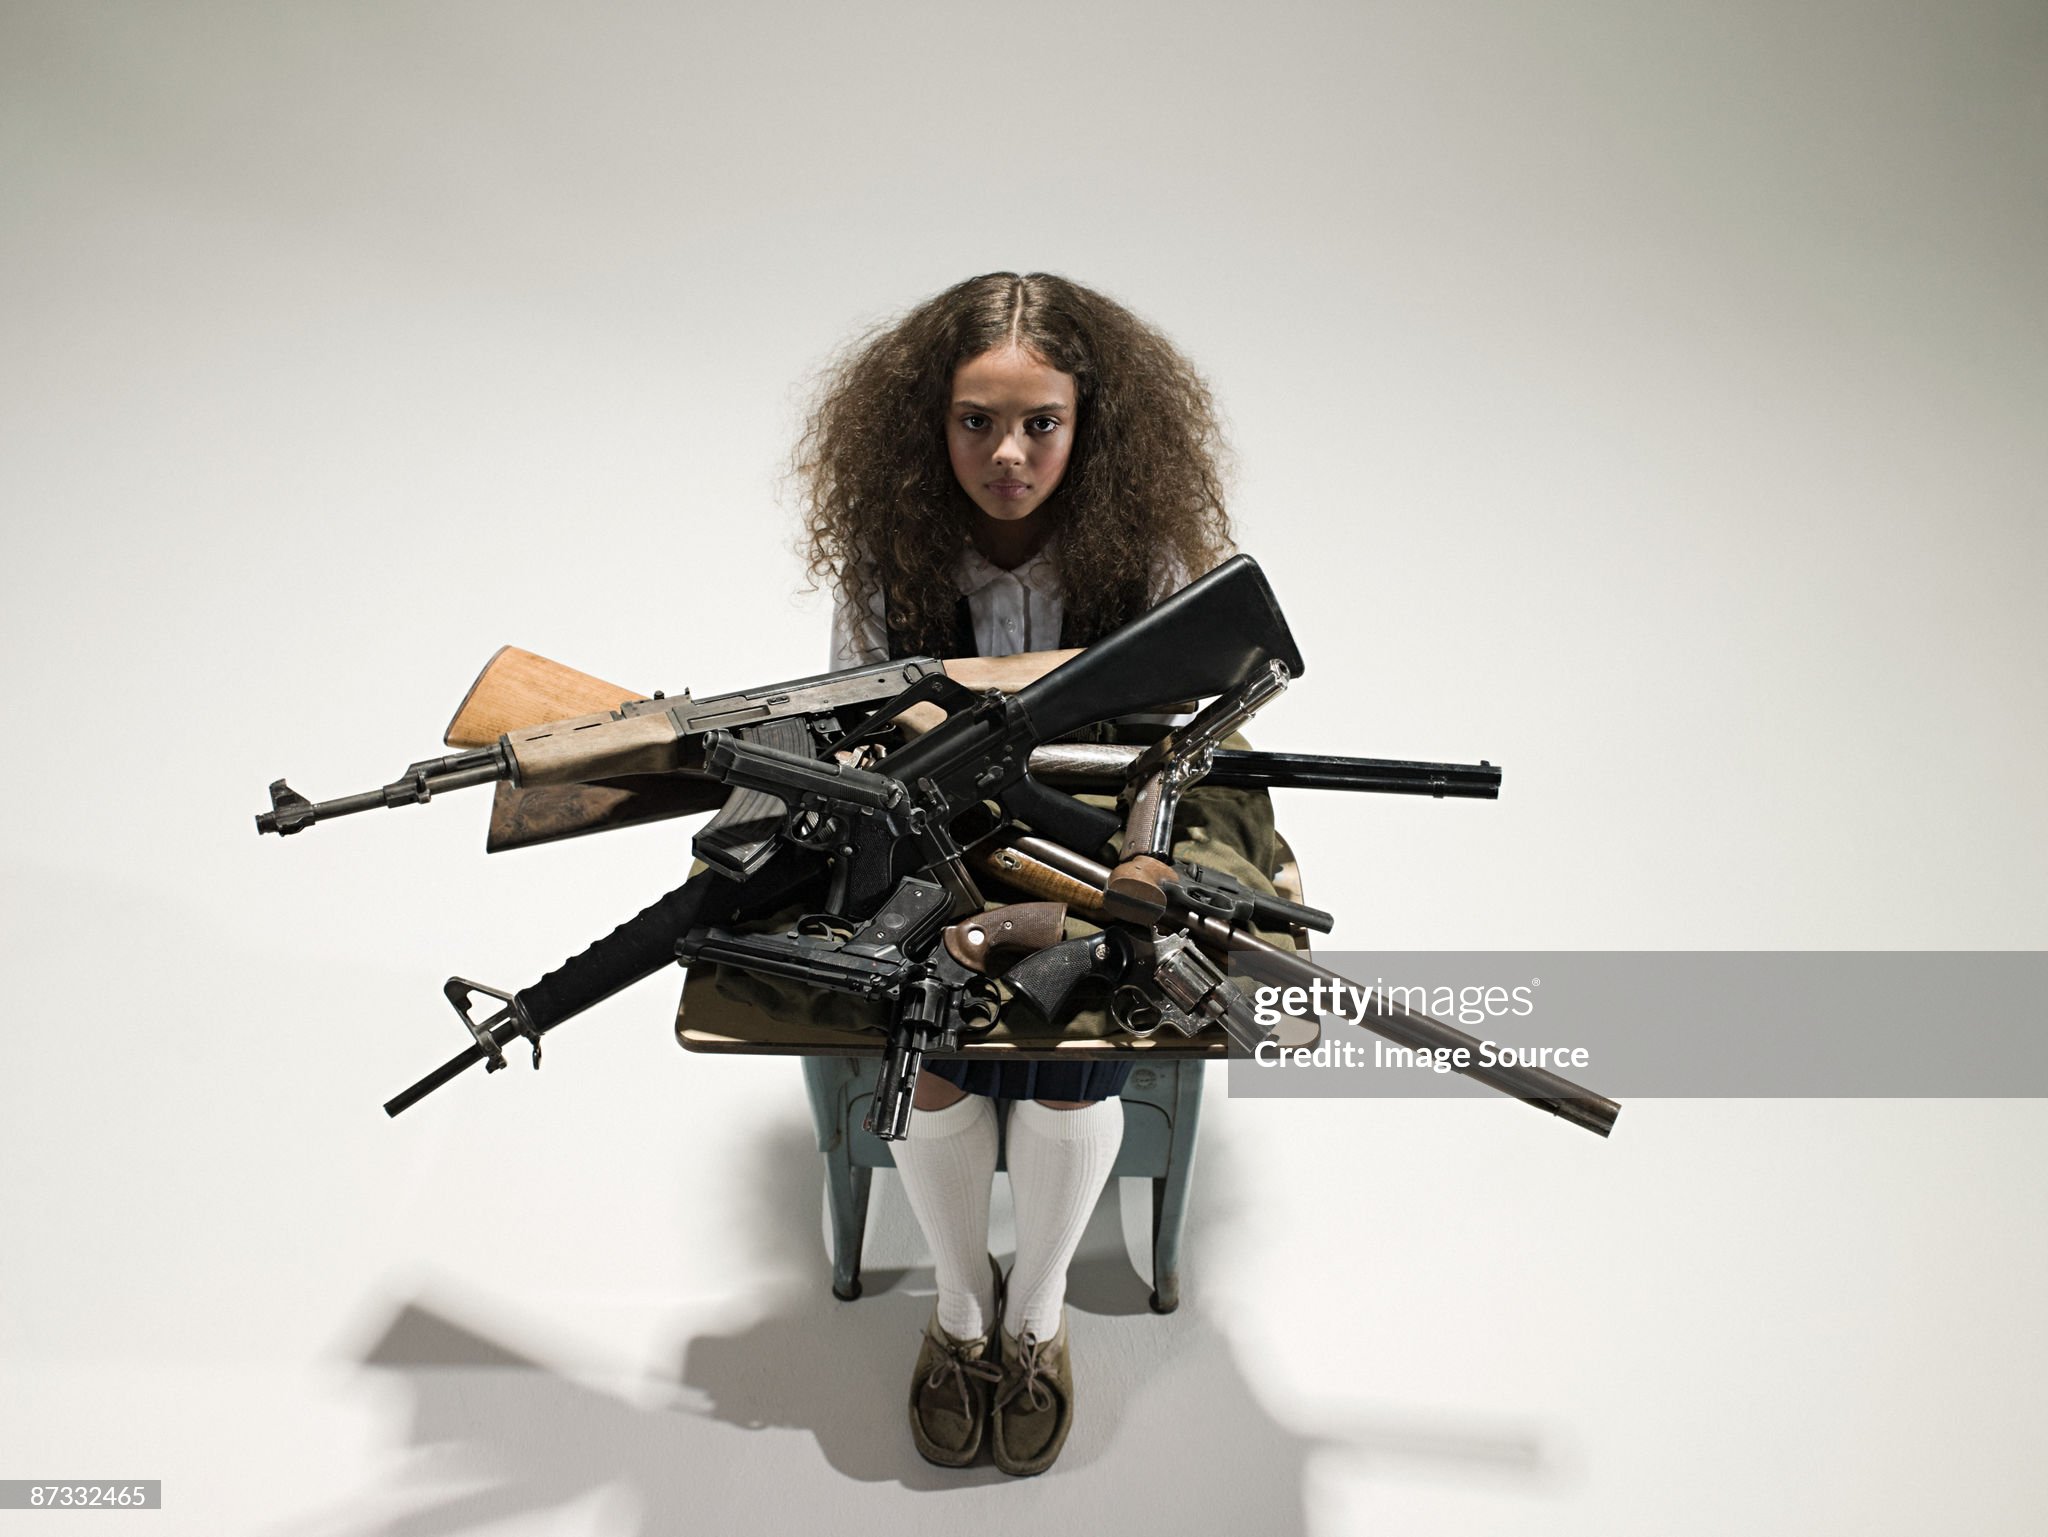 girl-with-guns-on-her-desk-picture-id87332465